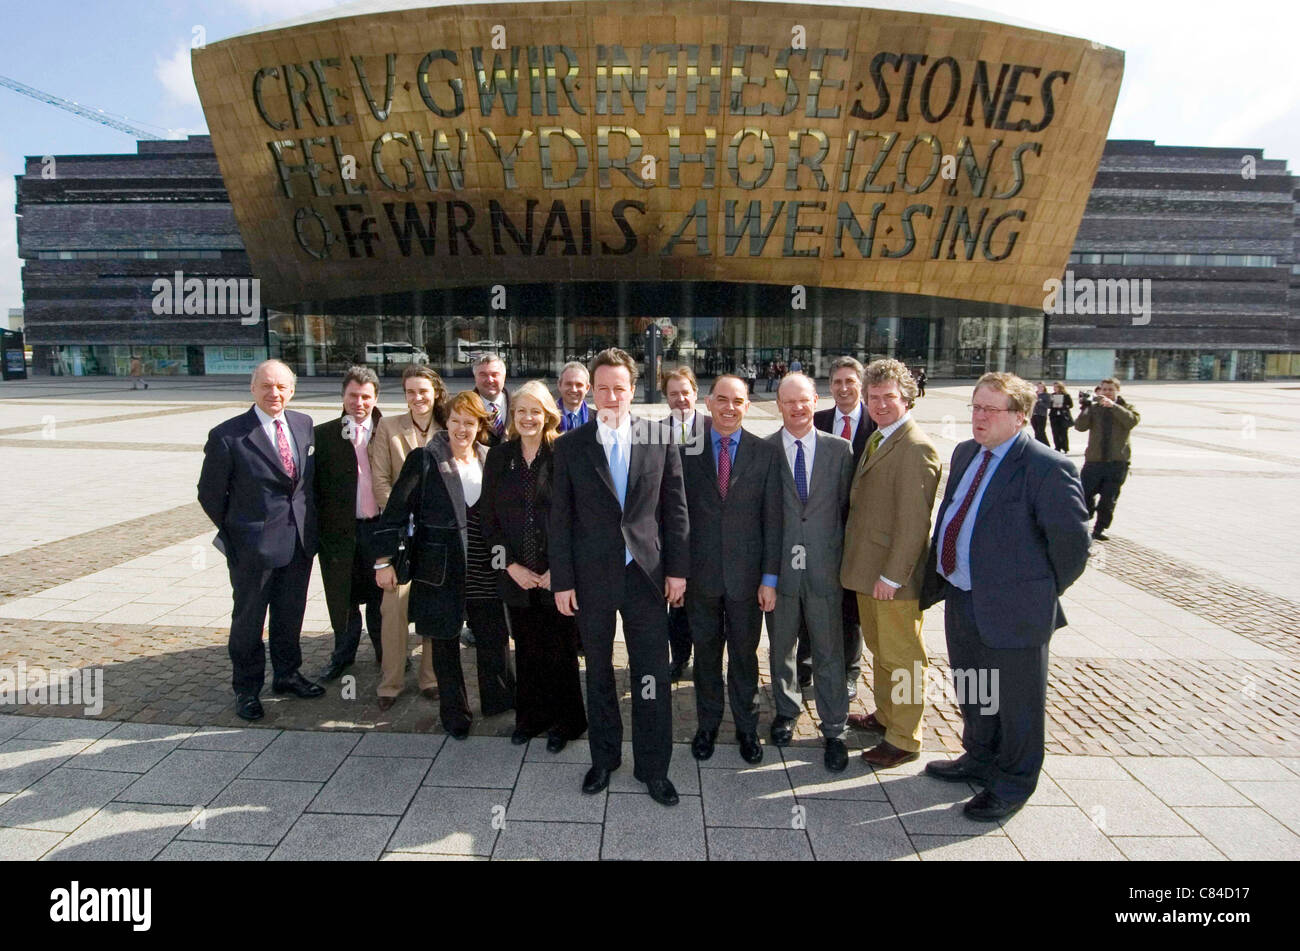 David Cameron the Conservative leader with members of his shadow cabinet outside the Wales Millennium Centre in Cardiff Bay. Stock Photo